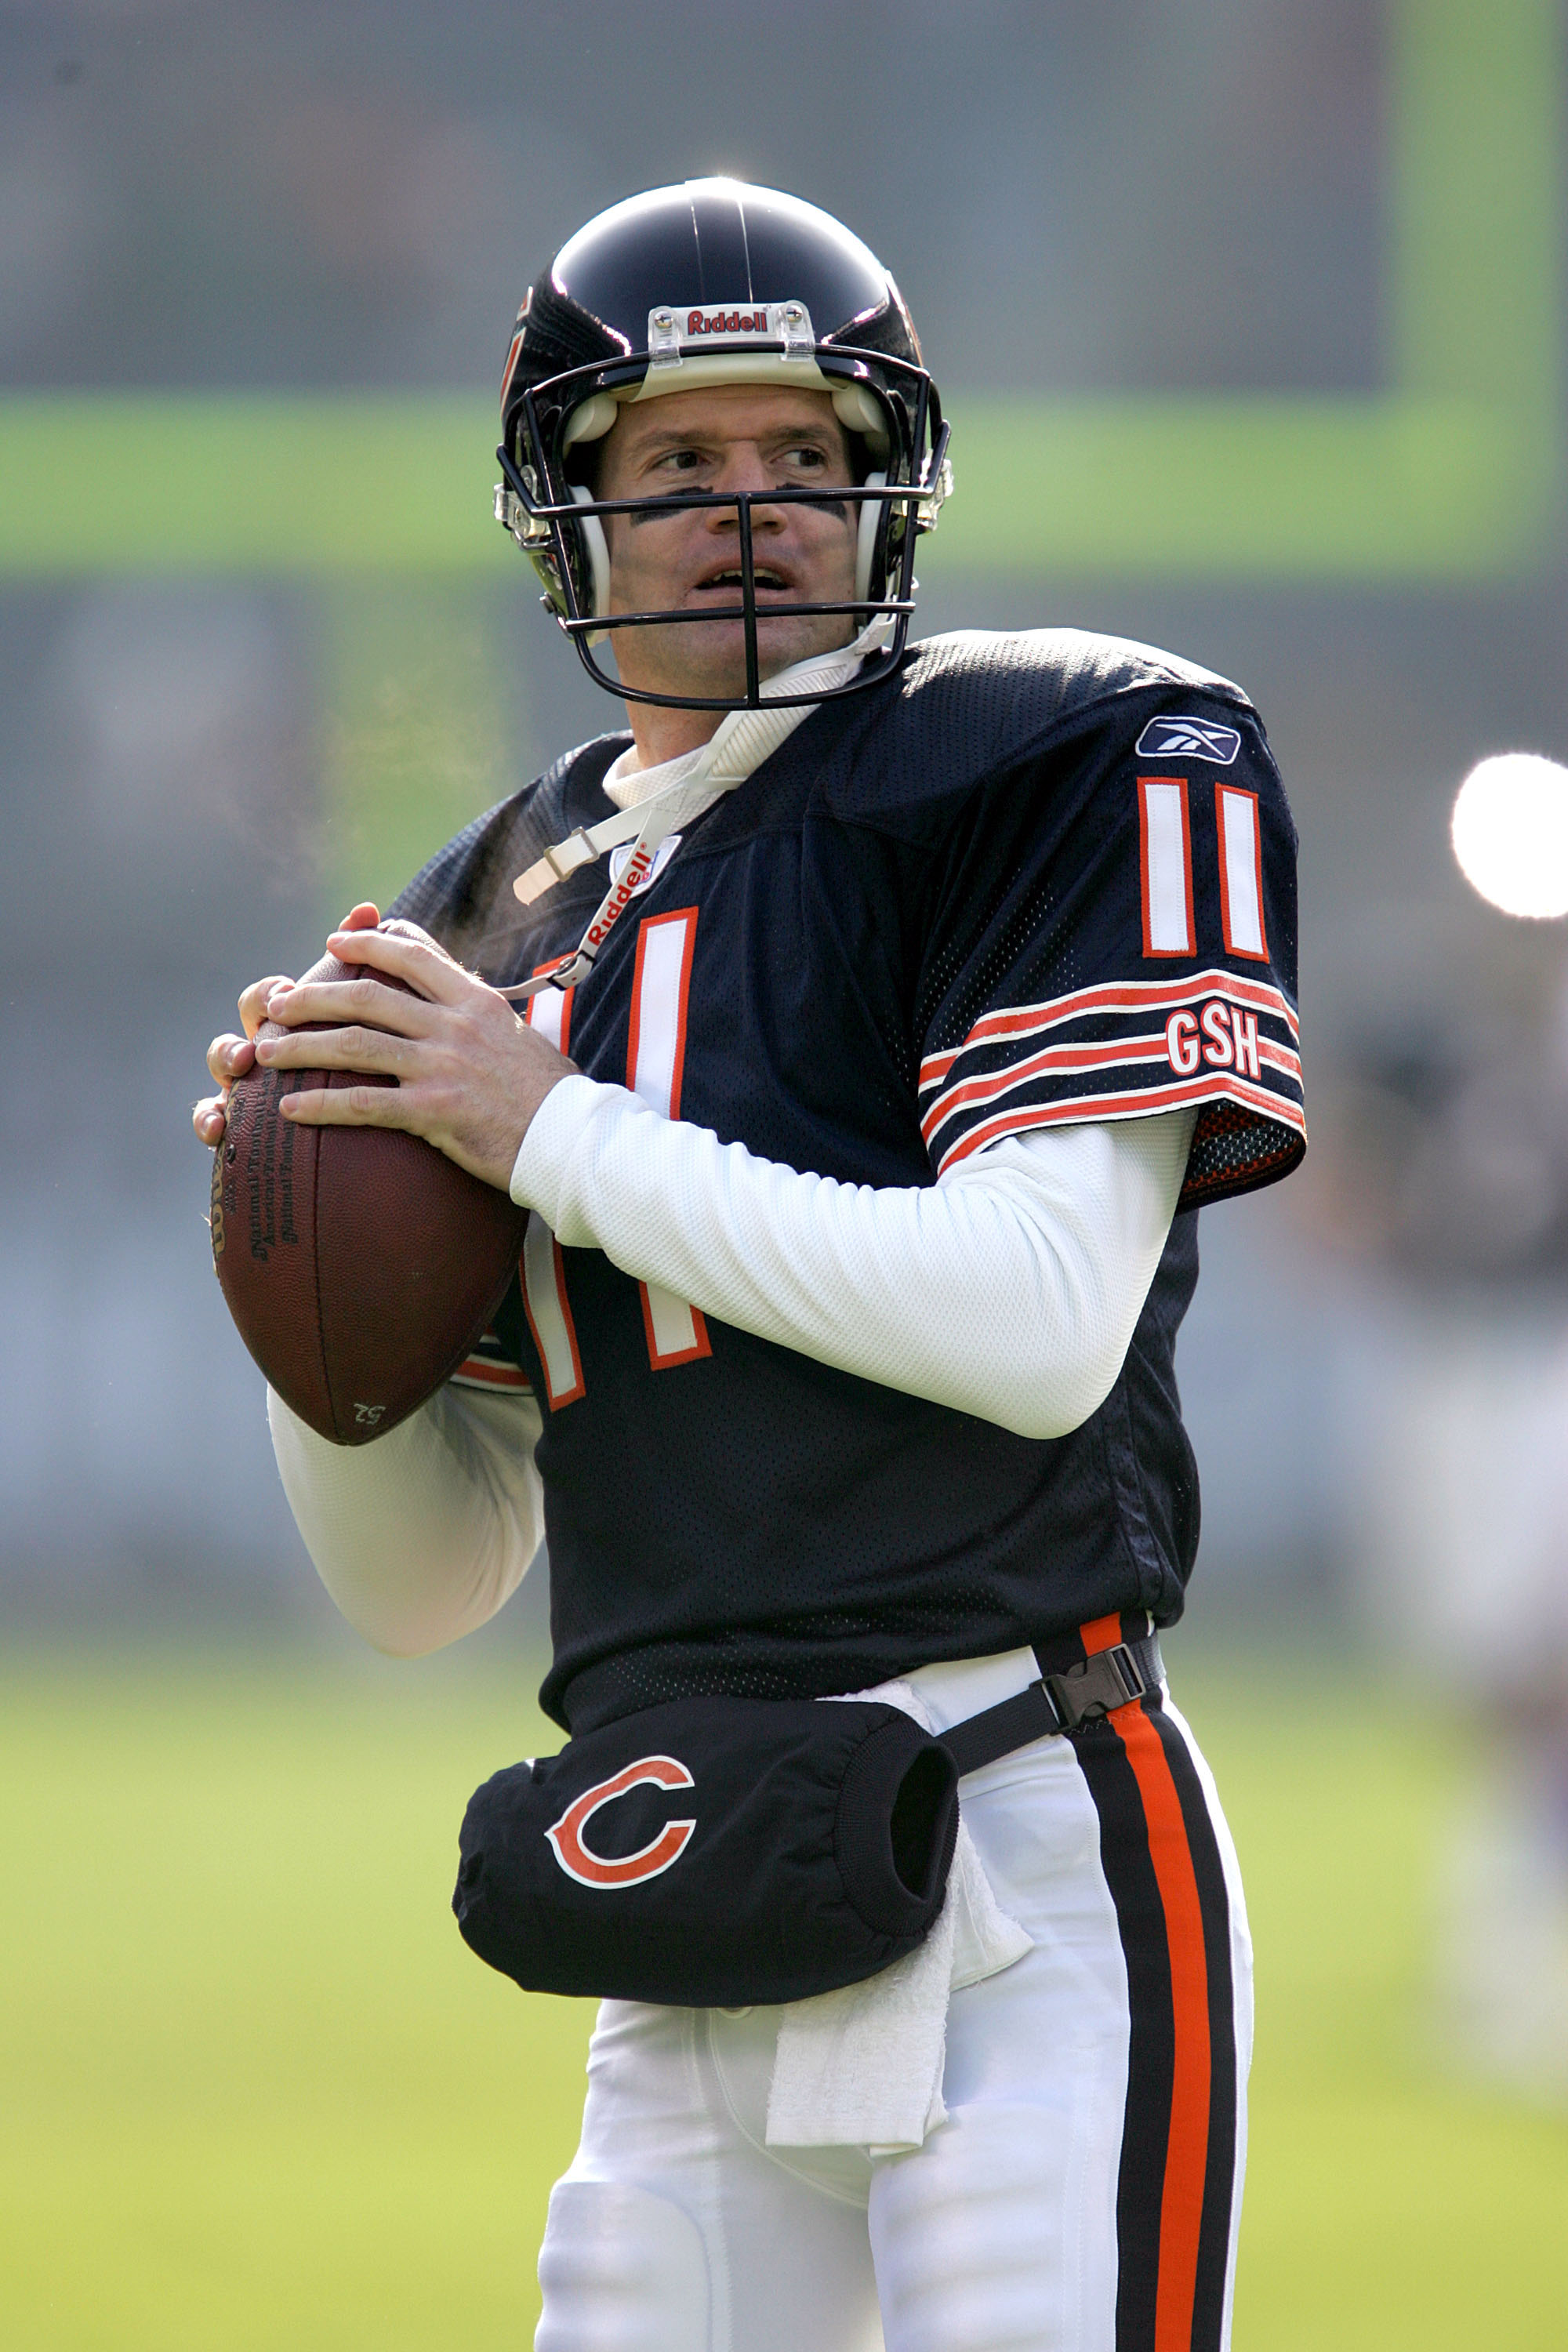 CHICAGO - DECEMBER 05: Recently signed QB Jeff George #11 of the Chicago Bears warms up prior to a game against the Minnesota Vikings on December 5, 2004 at Soldier Field in Chicago, Illinois. (Photo by Jonathan Daniel/Getty Images)